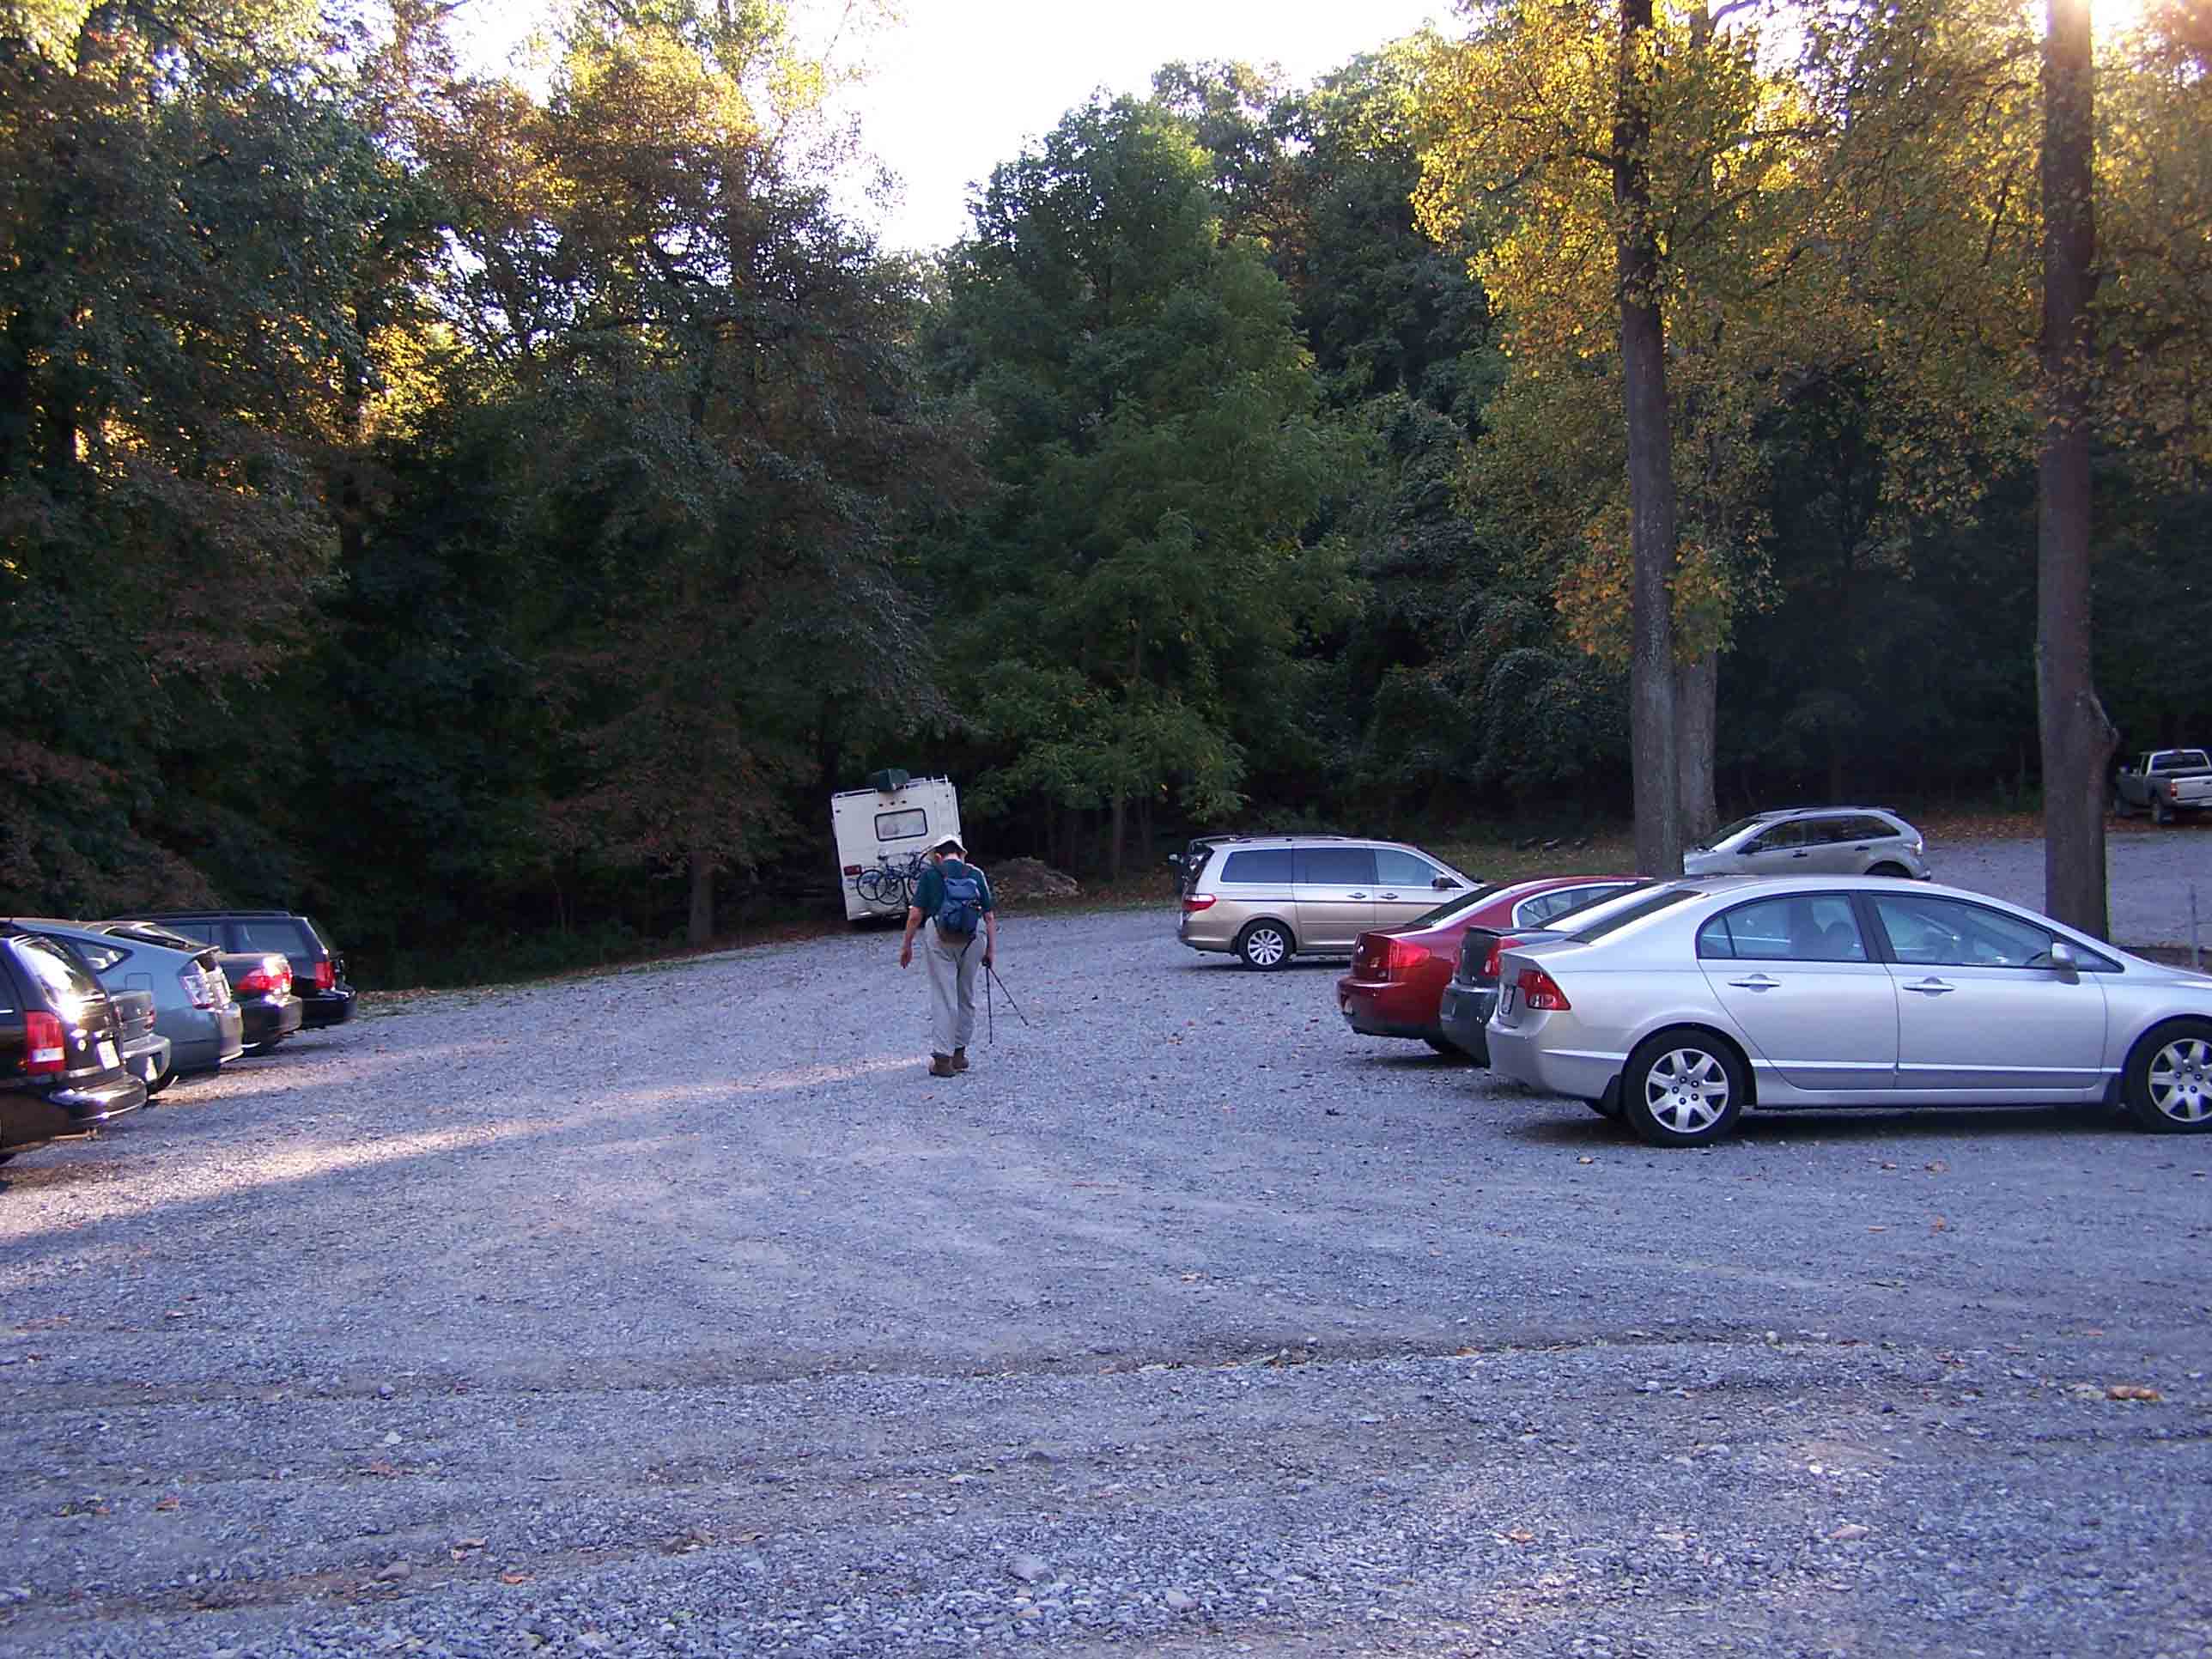 mm 0.0 - Parking lot for Old South Mountain Inn. Ask permission before parking here. Courtesy at@rohland.org